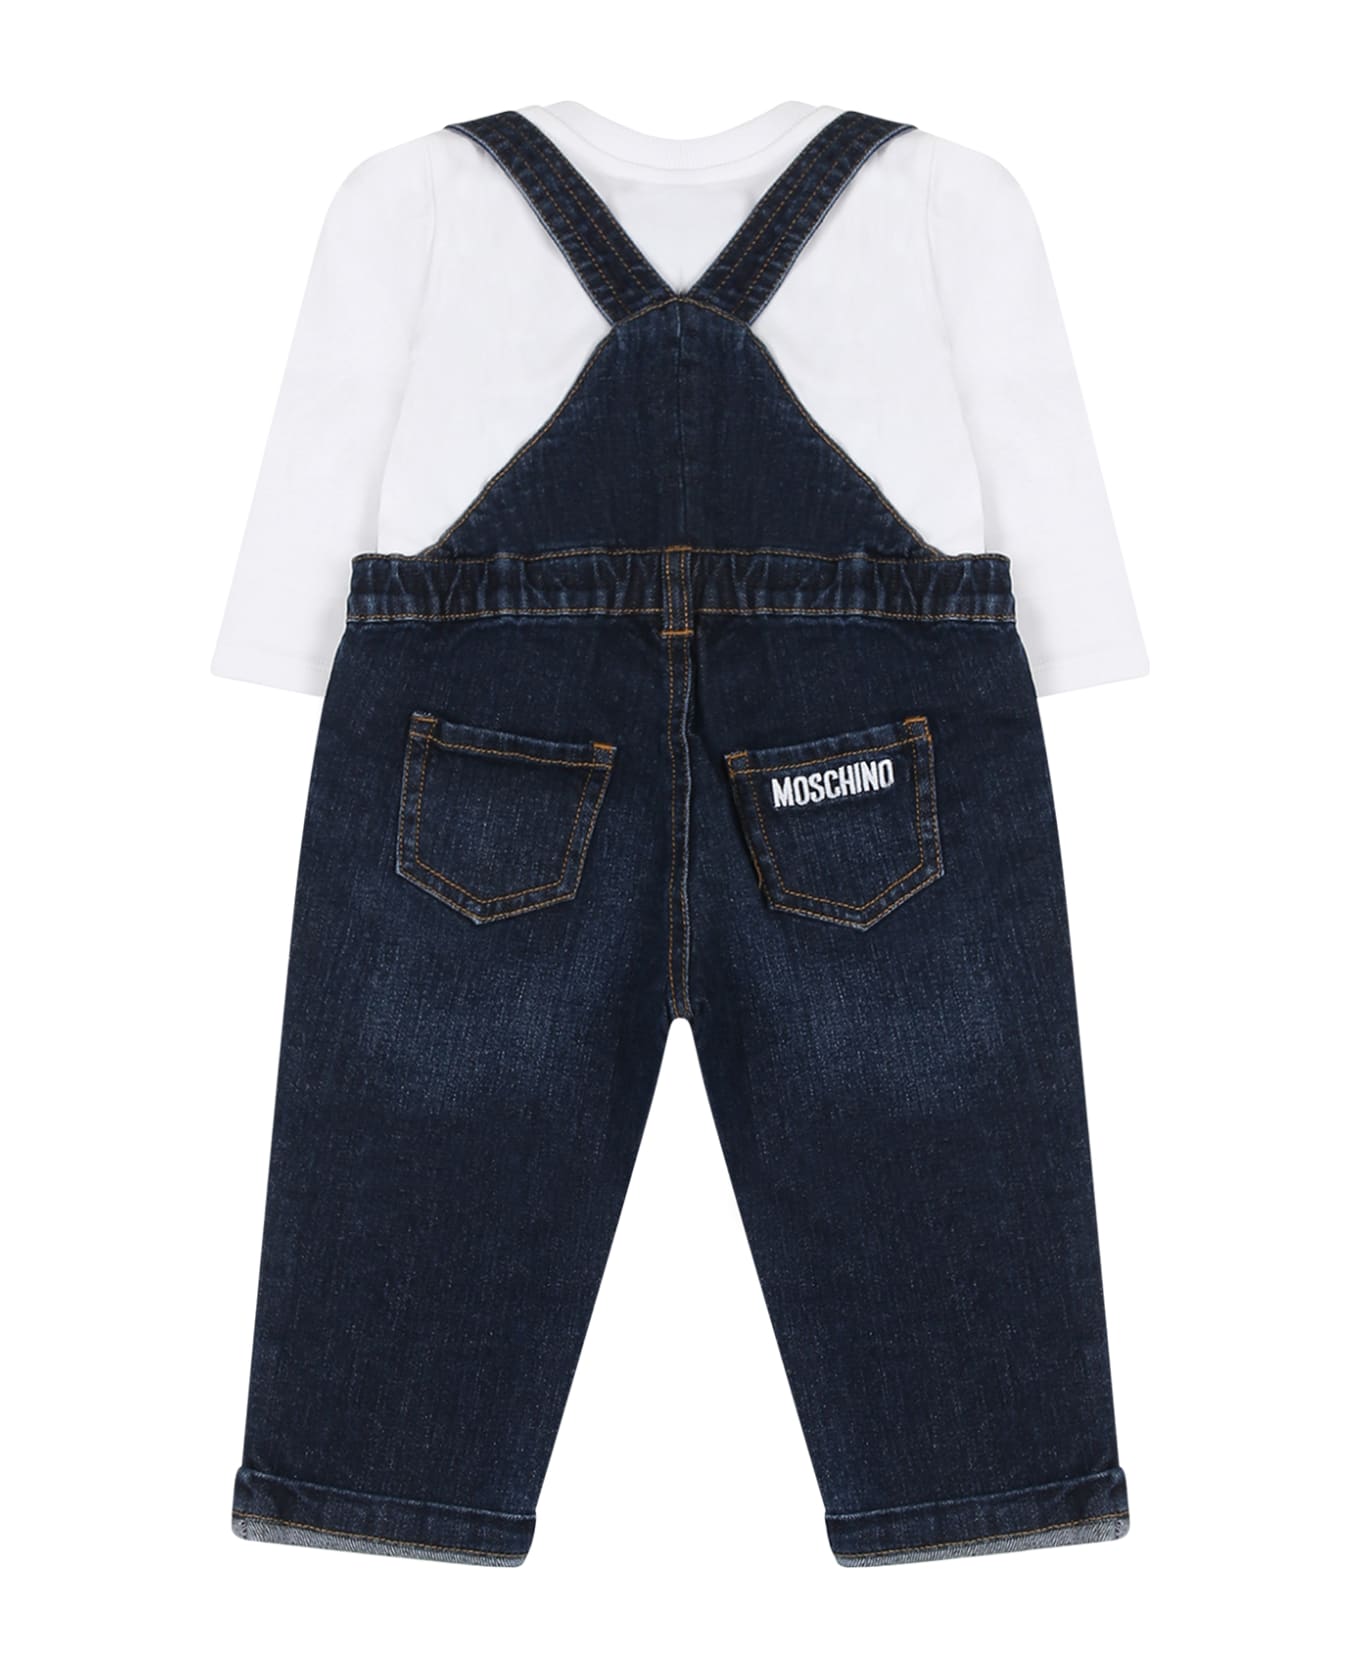 Moschino Blue Suit For Bay Girl With Teddy Bear - DENIM BLUE